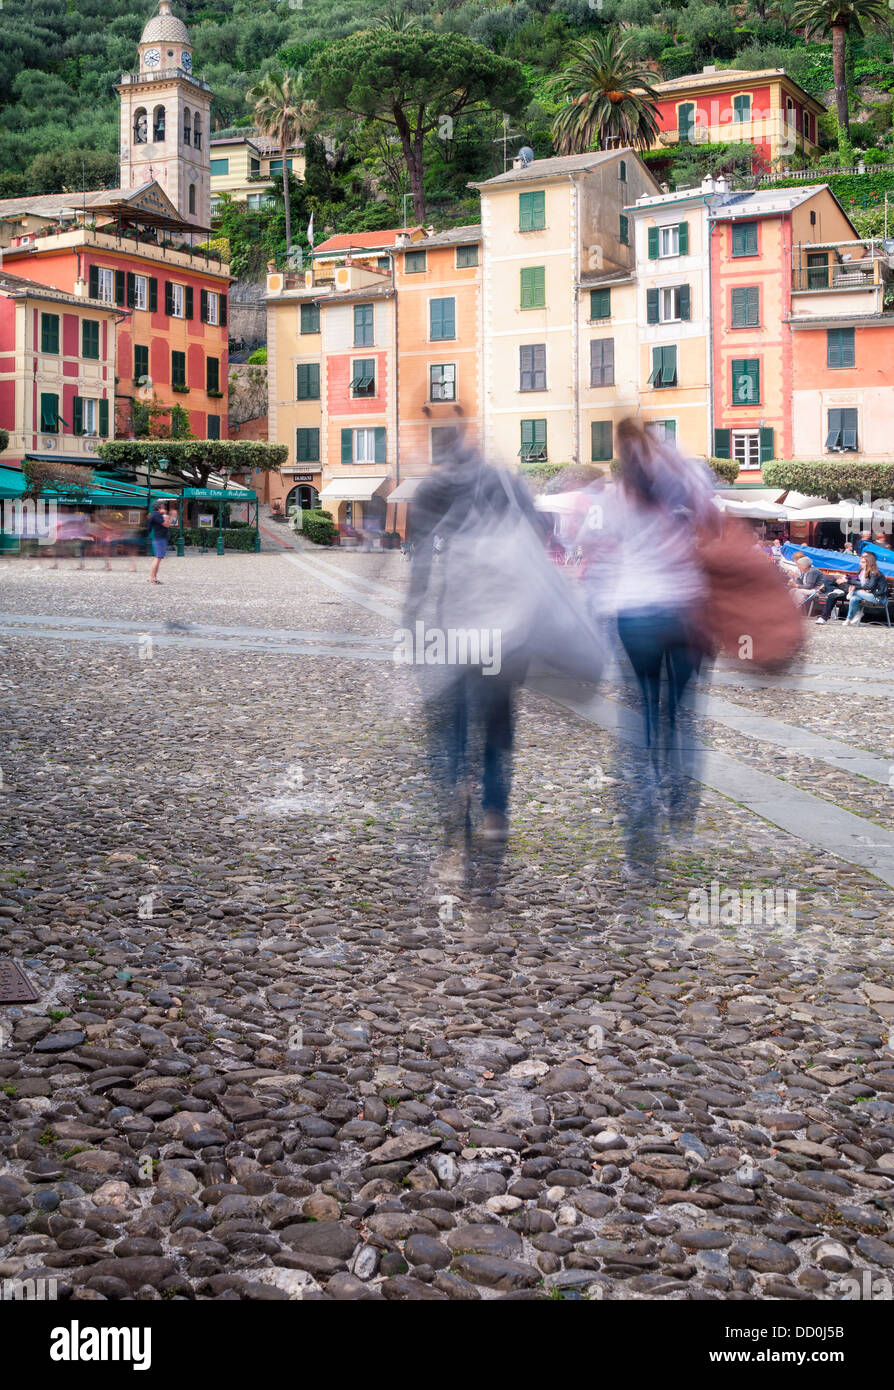 Portofino harbour front with motion blur of tourists, brightly coloured apartment buildings, outdoor cafes, church and belltower Stock Photo